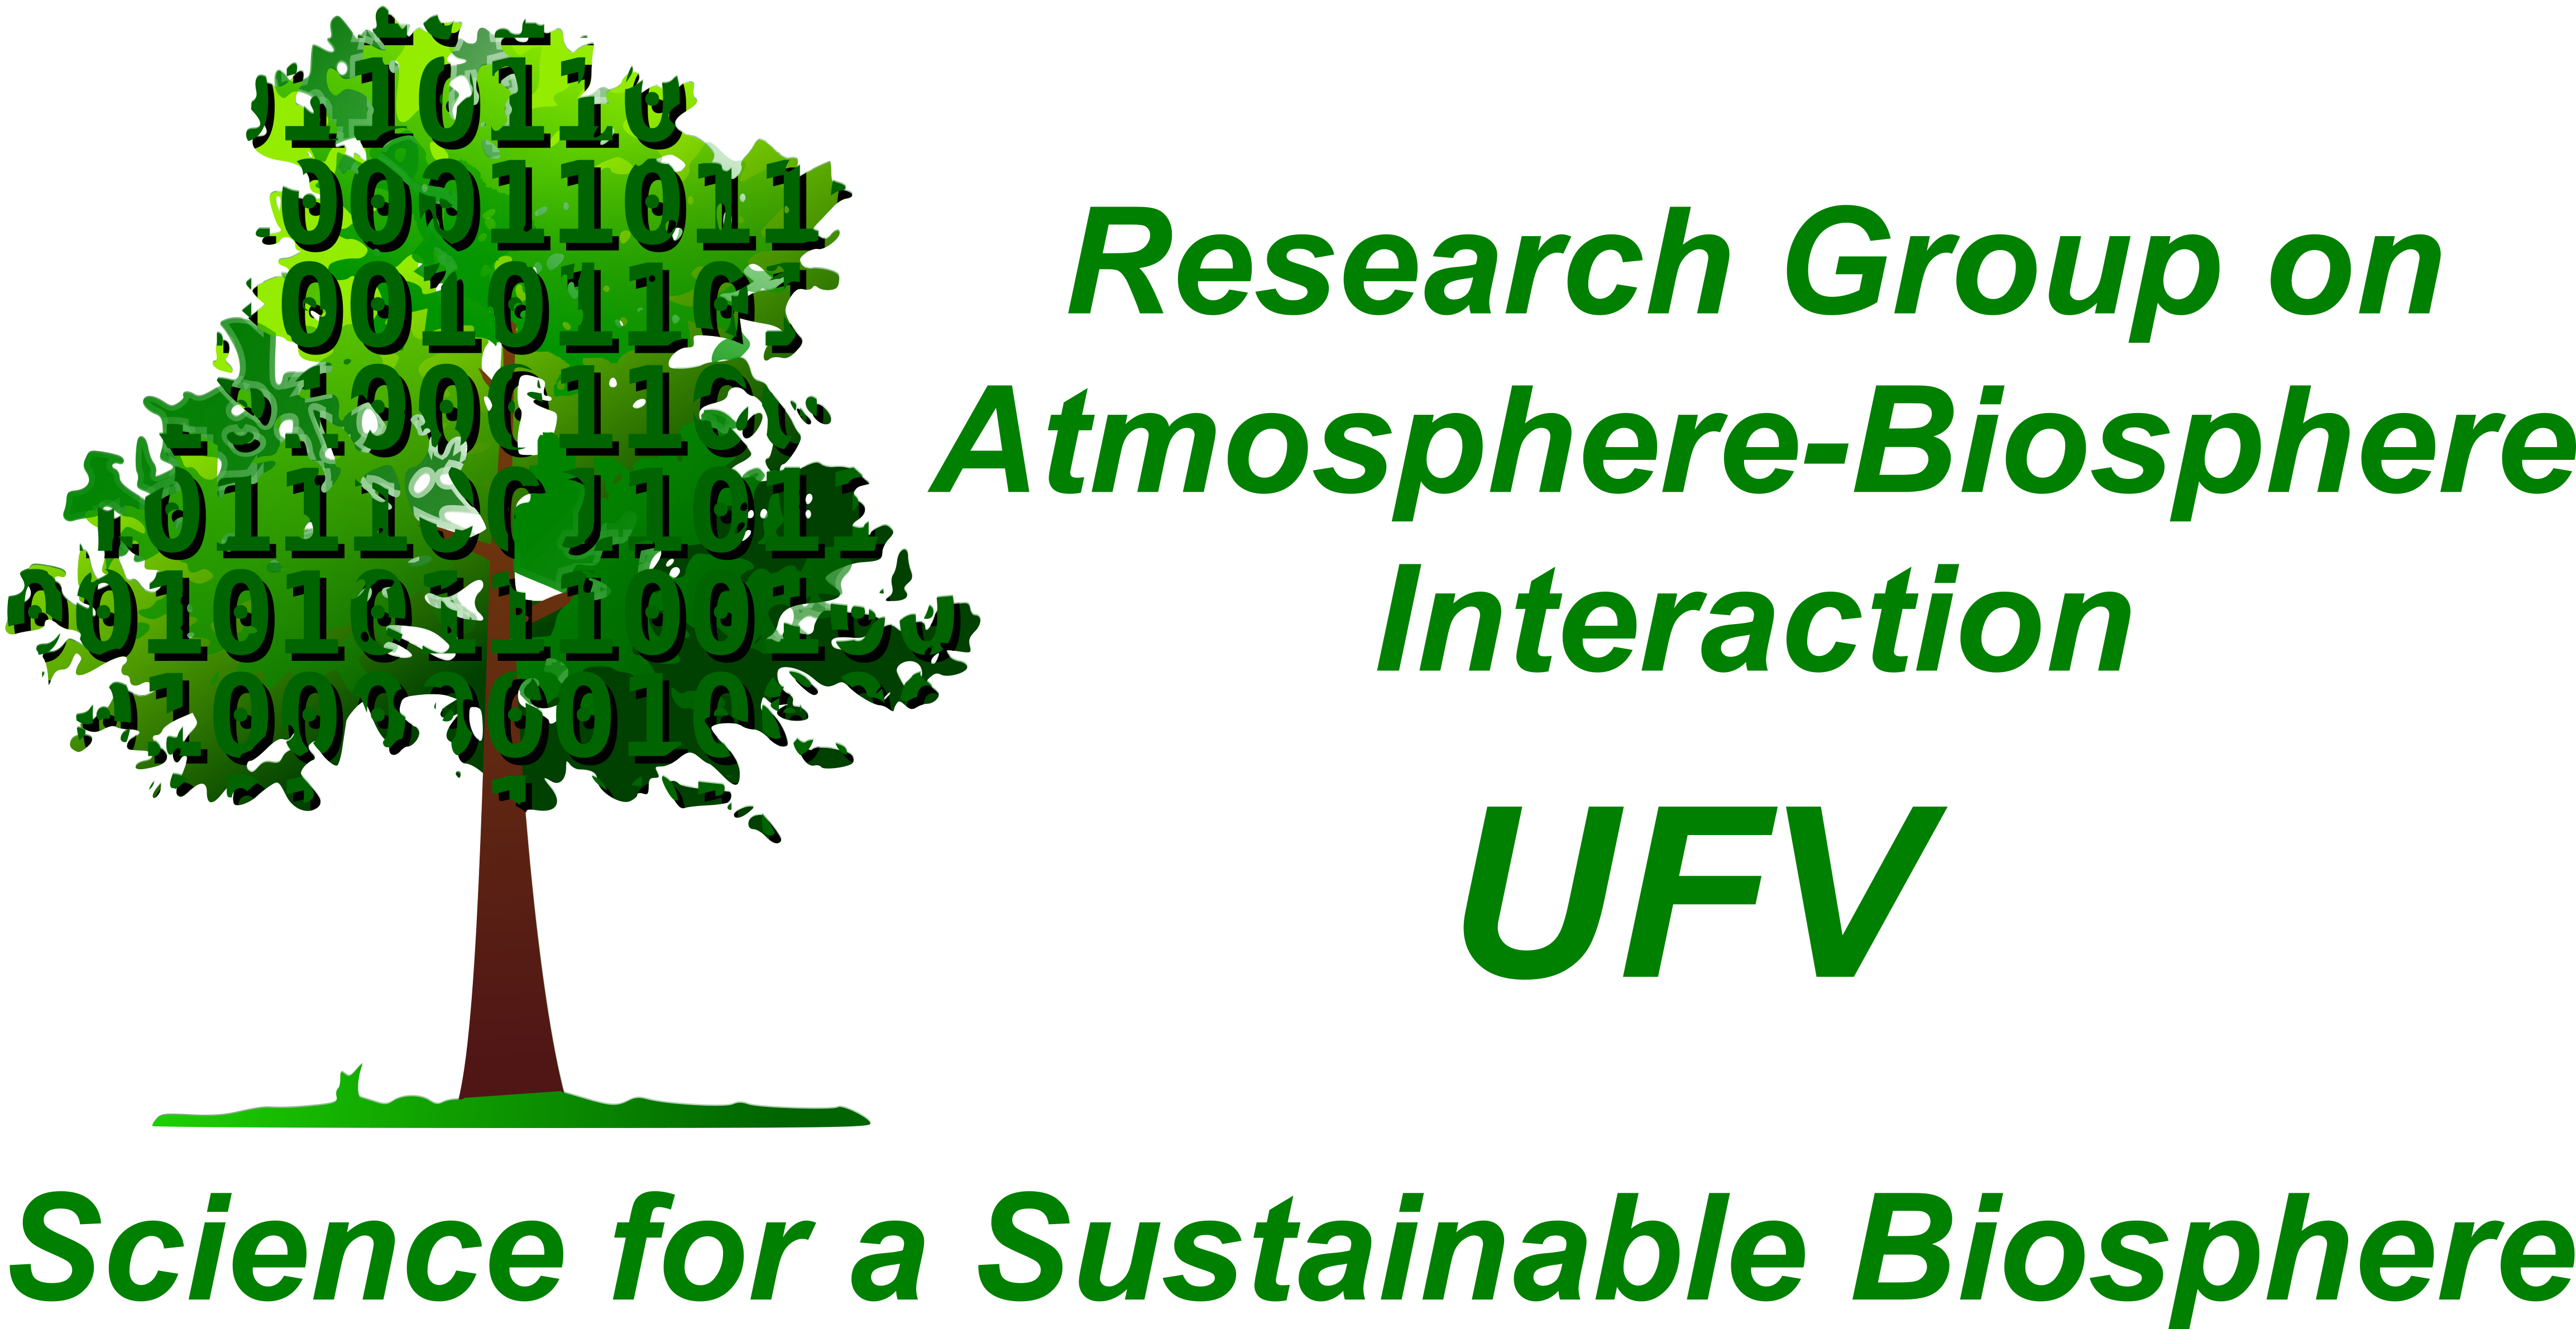 Atmosfere-Biosfere Research Group